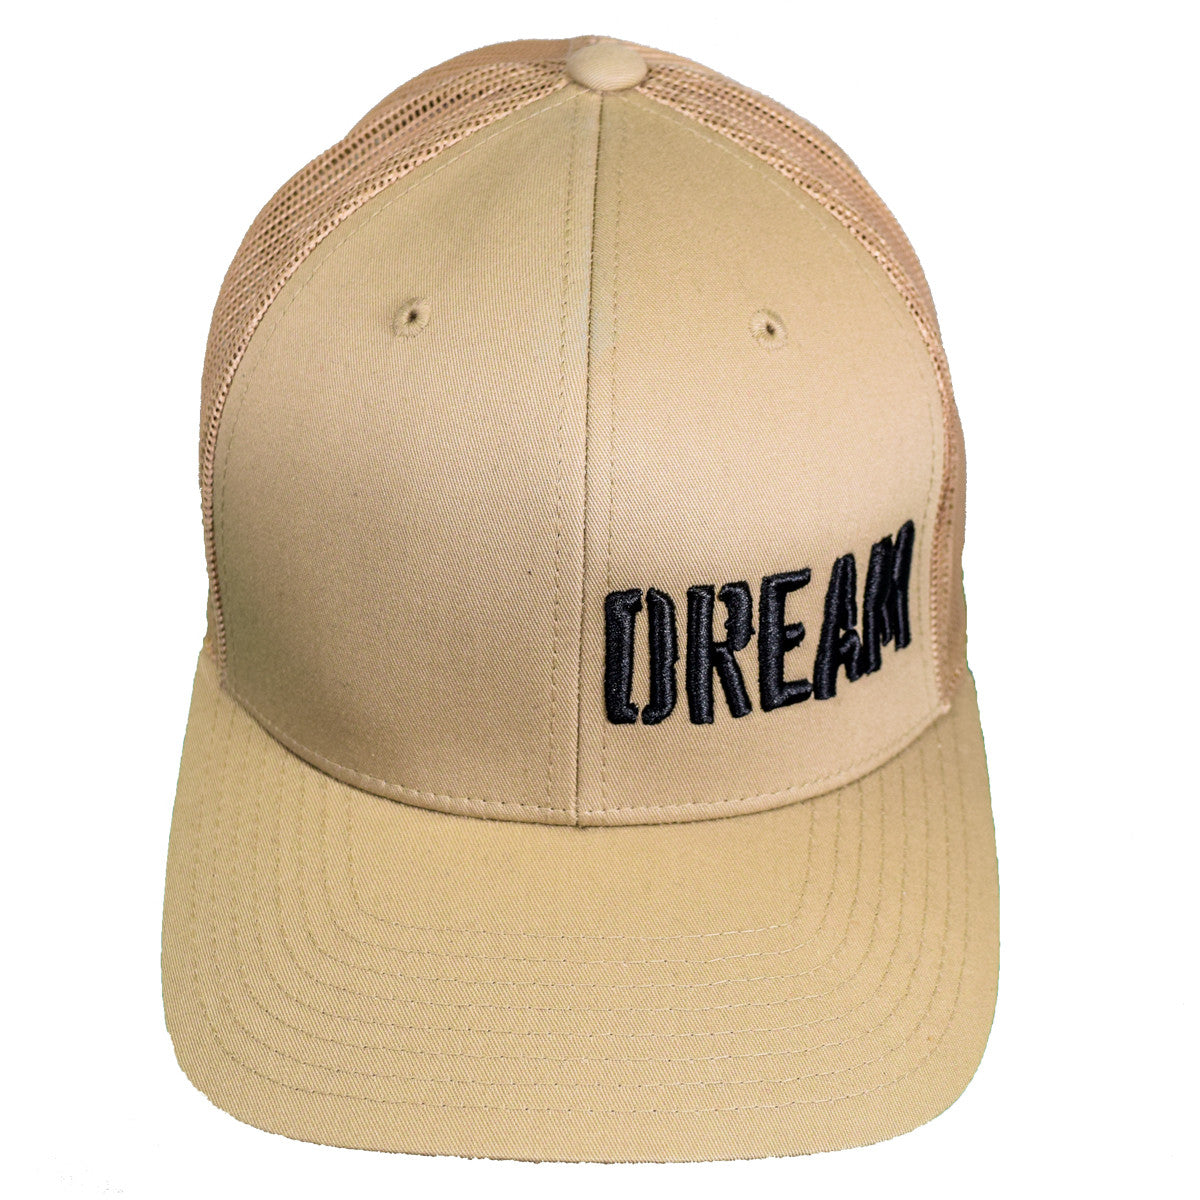 DREAM Curved Trucker Snapback Hat